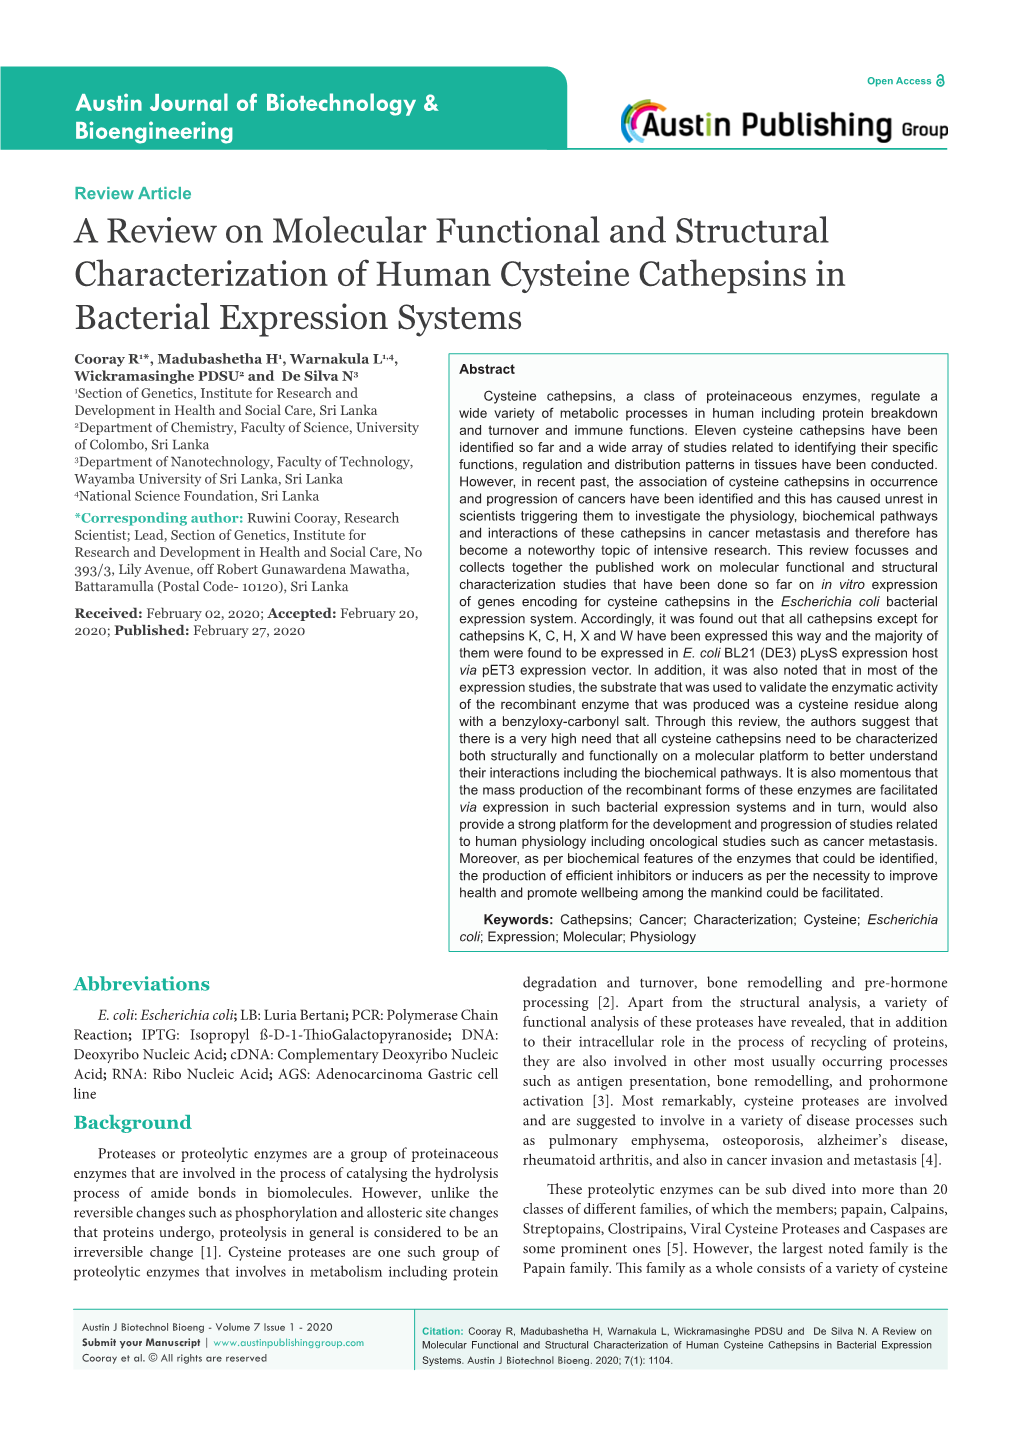 A Review on Molecular Functional and Structural Characterization of Human Cysteine Cathepsins in Bacterial Expression Systems